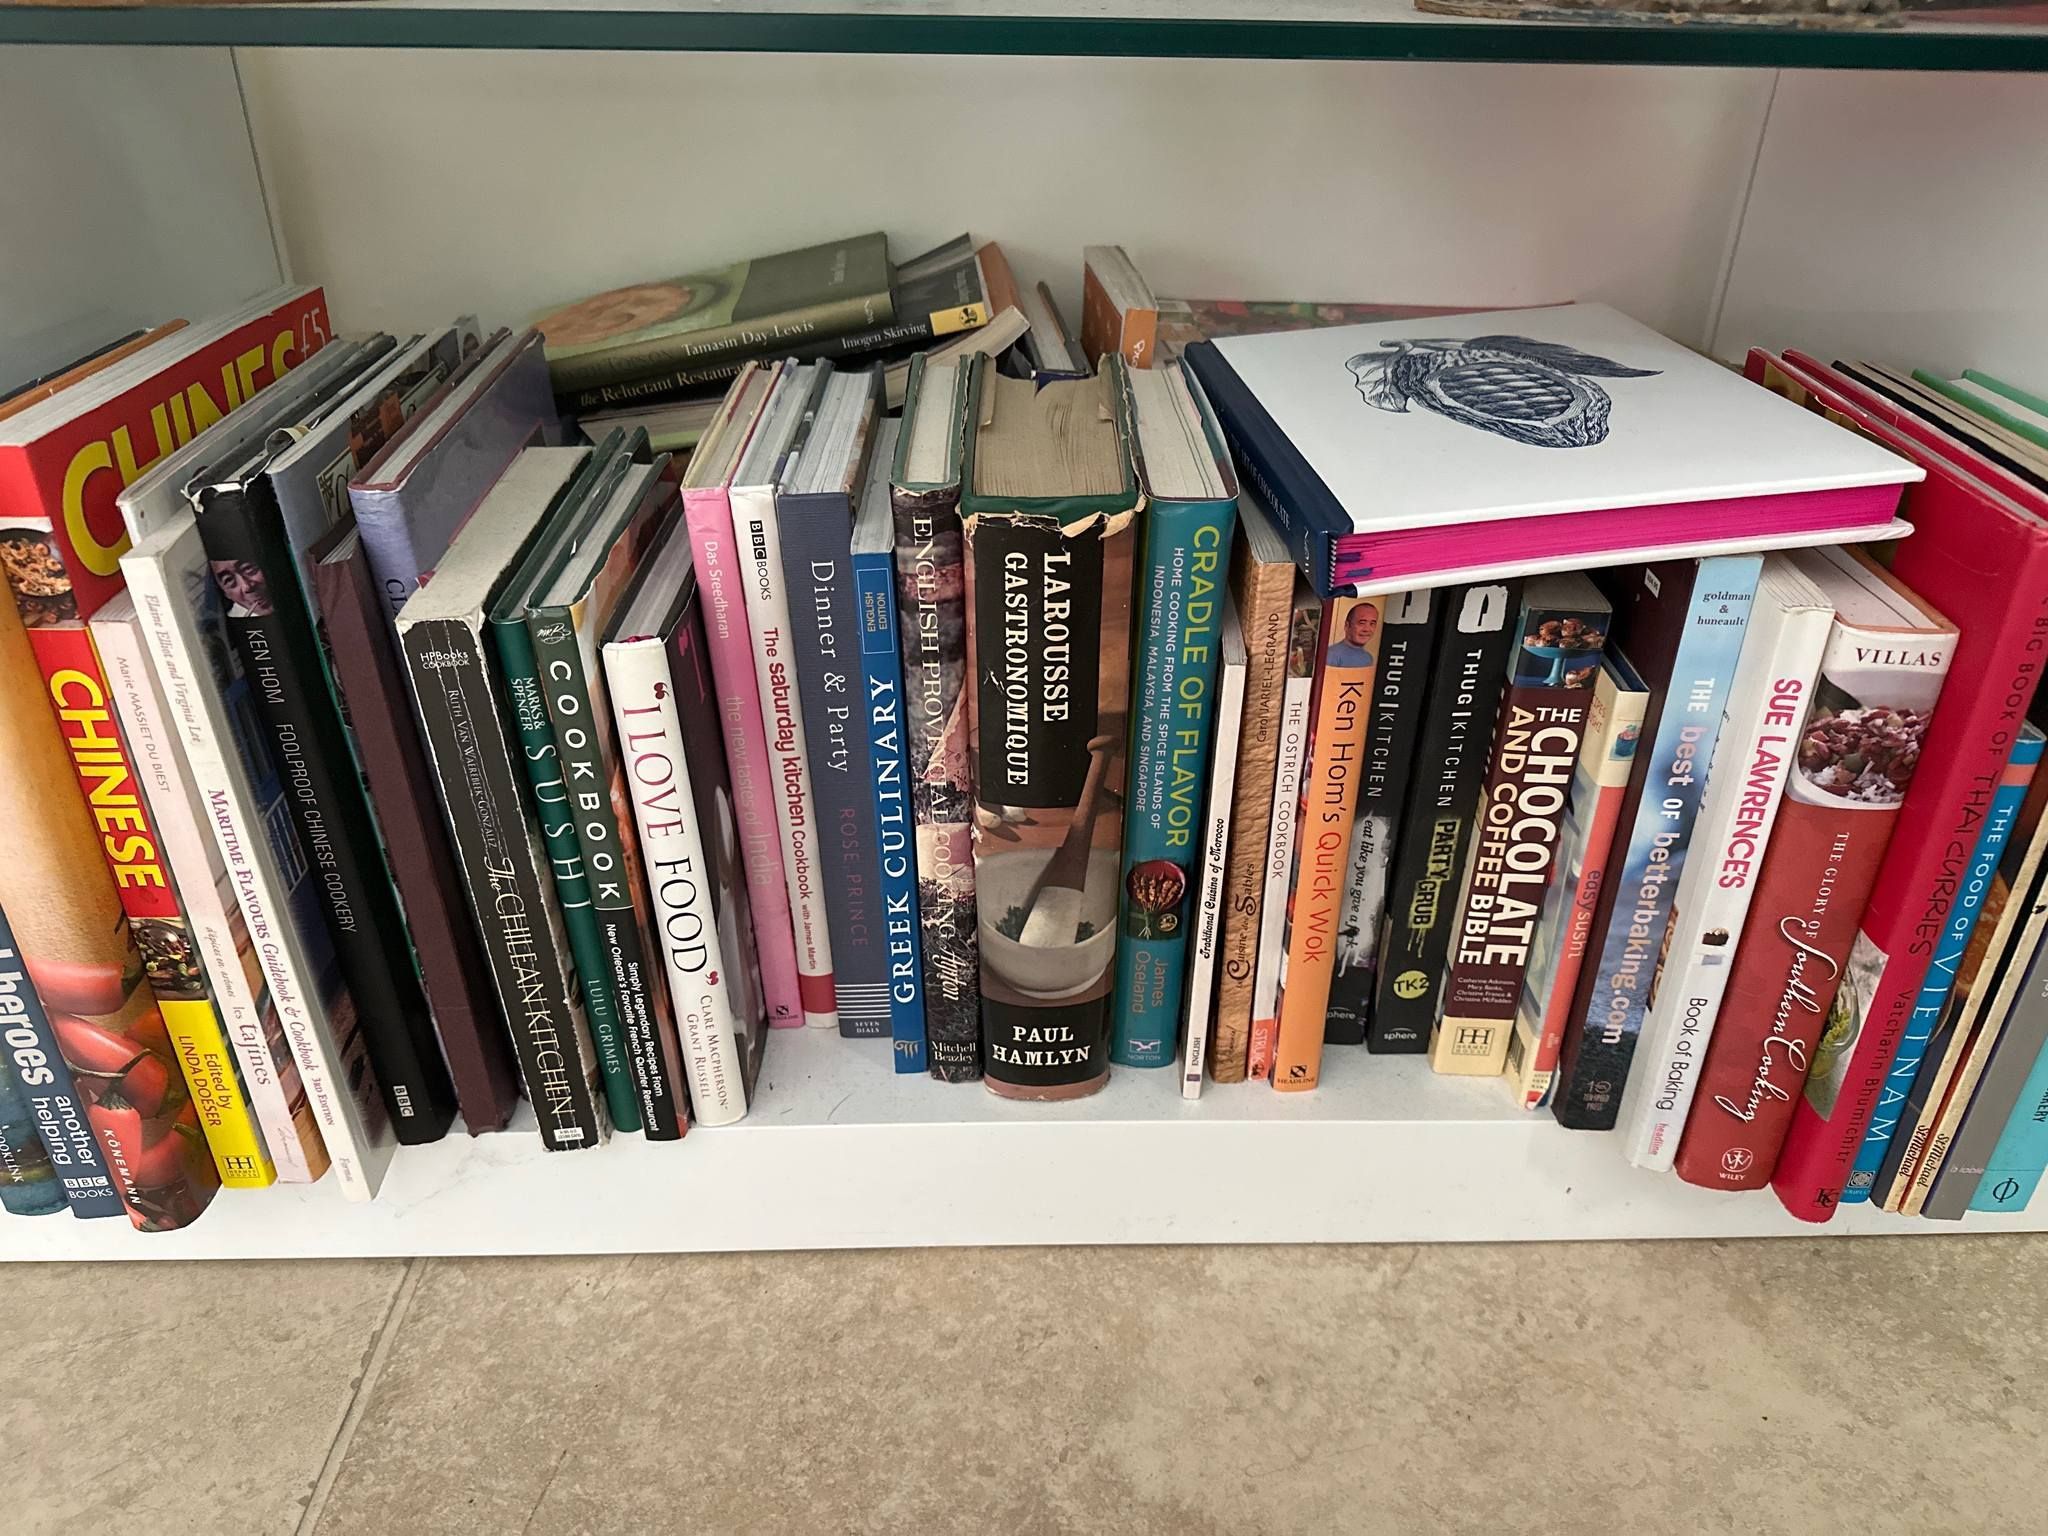 A shelf full of cookbooks. Titles include: 'The Chocolate and Coffee Bible' and 'The Big Book of Thai Curries'